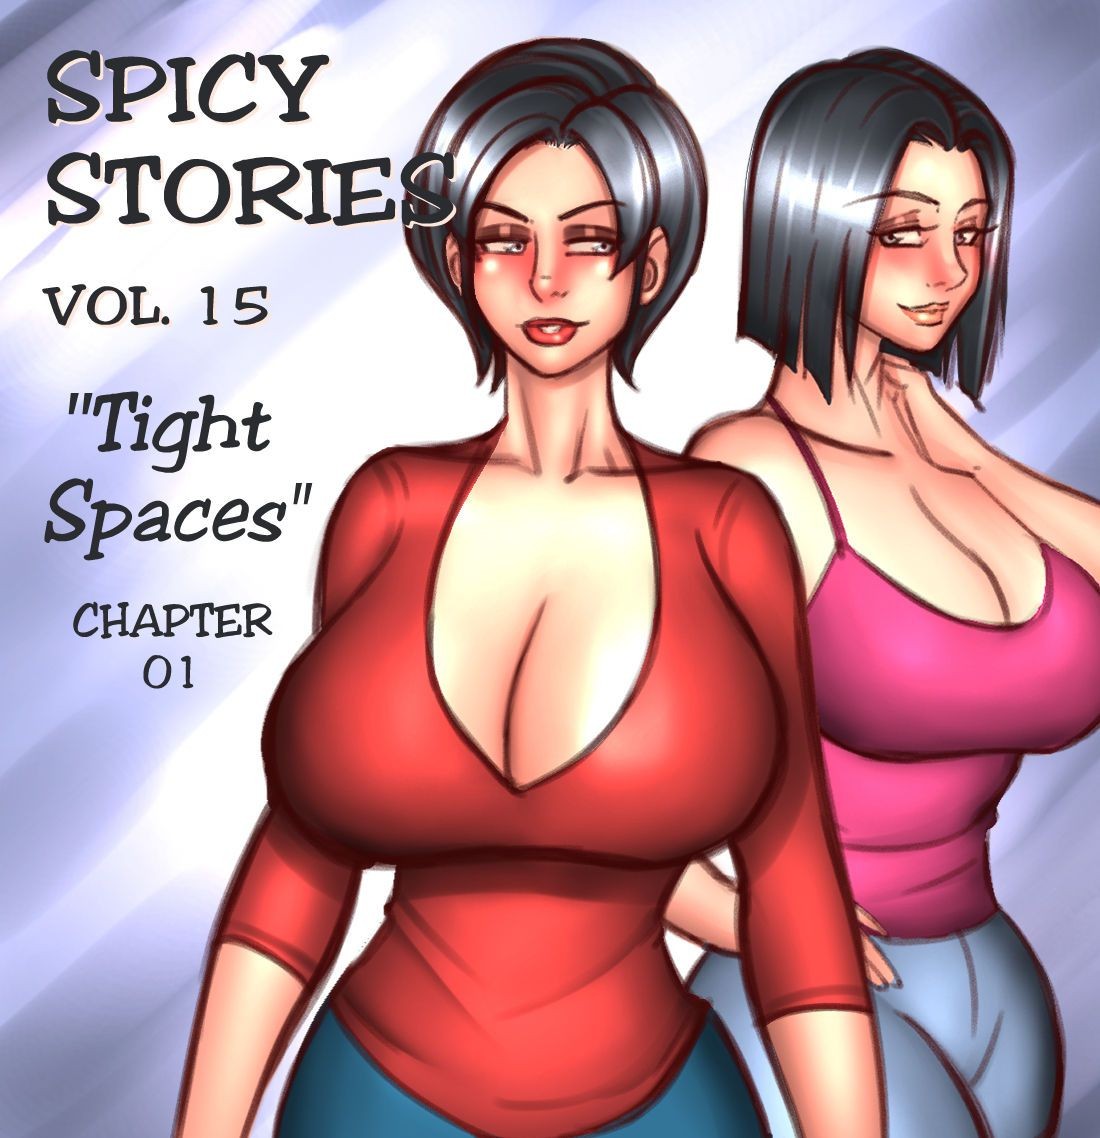 Petite Teenager NGT Spicy Stories 15 - Tight Spaces (Ongoing) NGT Spicy Stories 15 - Tight Spaces (Ongoing) Bareback